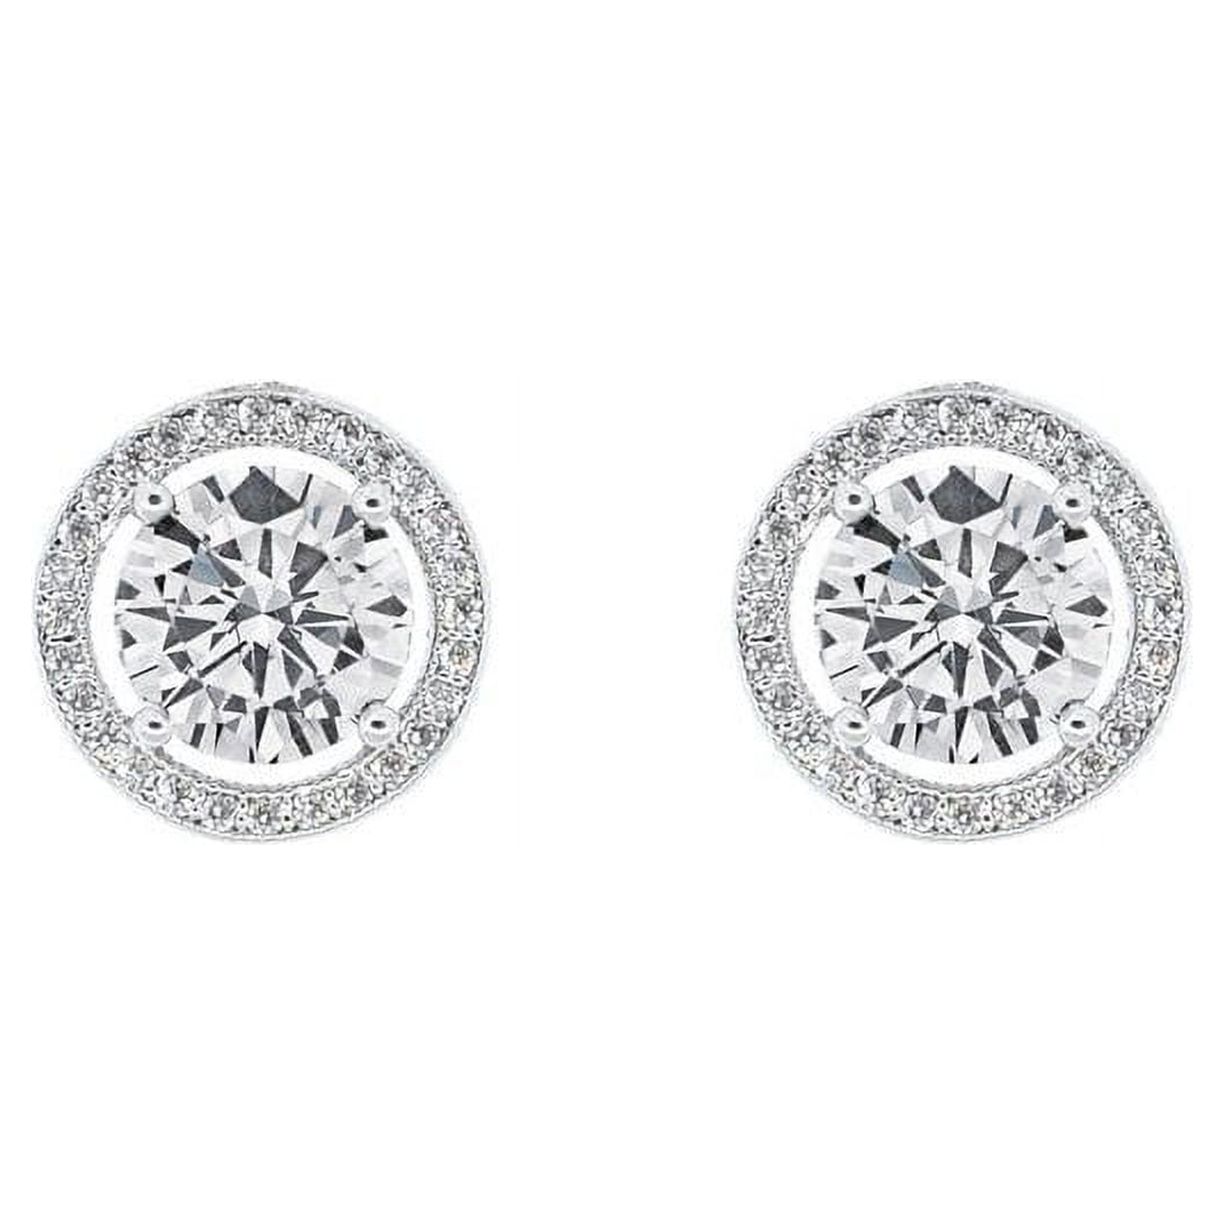 Cate & Chloe Ariel 18k White Gold Plated Silver Halo Stud Earrings | CZ Earrings for Women, Gift for Her - image 1 of 9